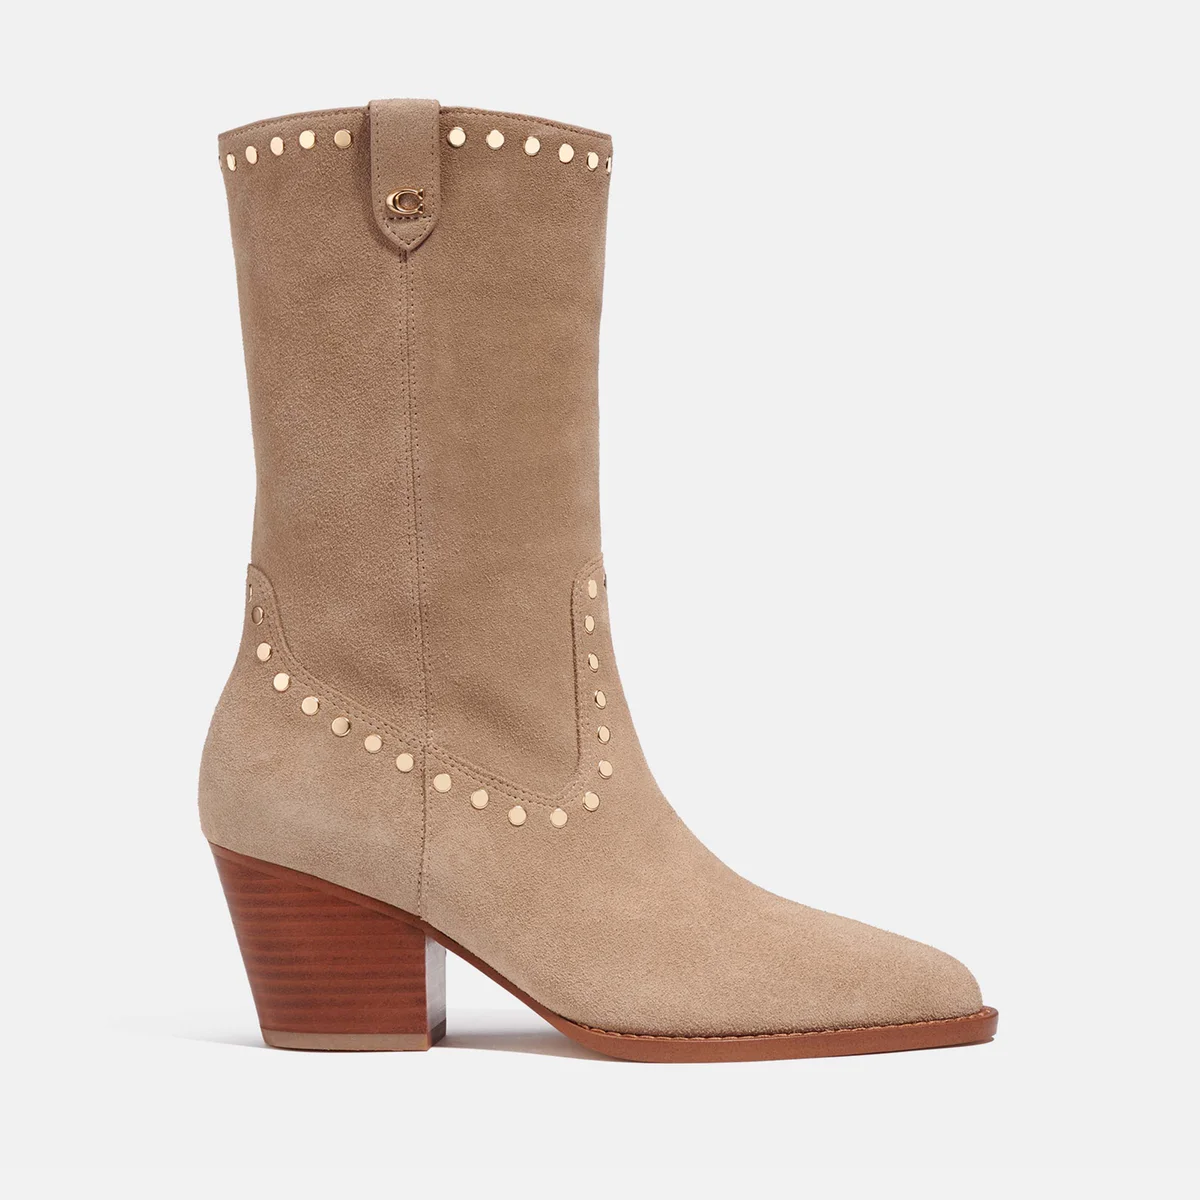 Coach Phoebe Suede Western Boots Image 1